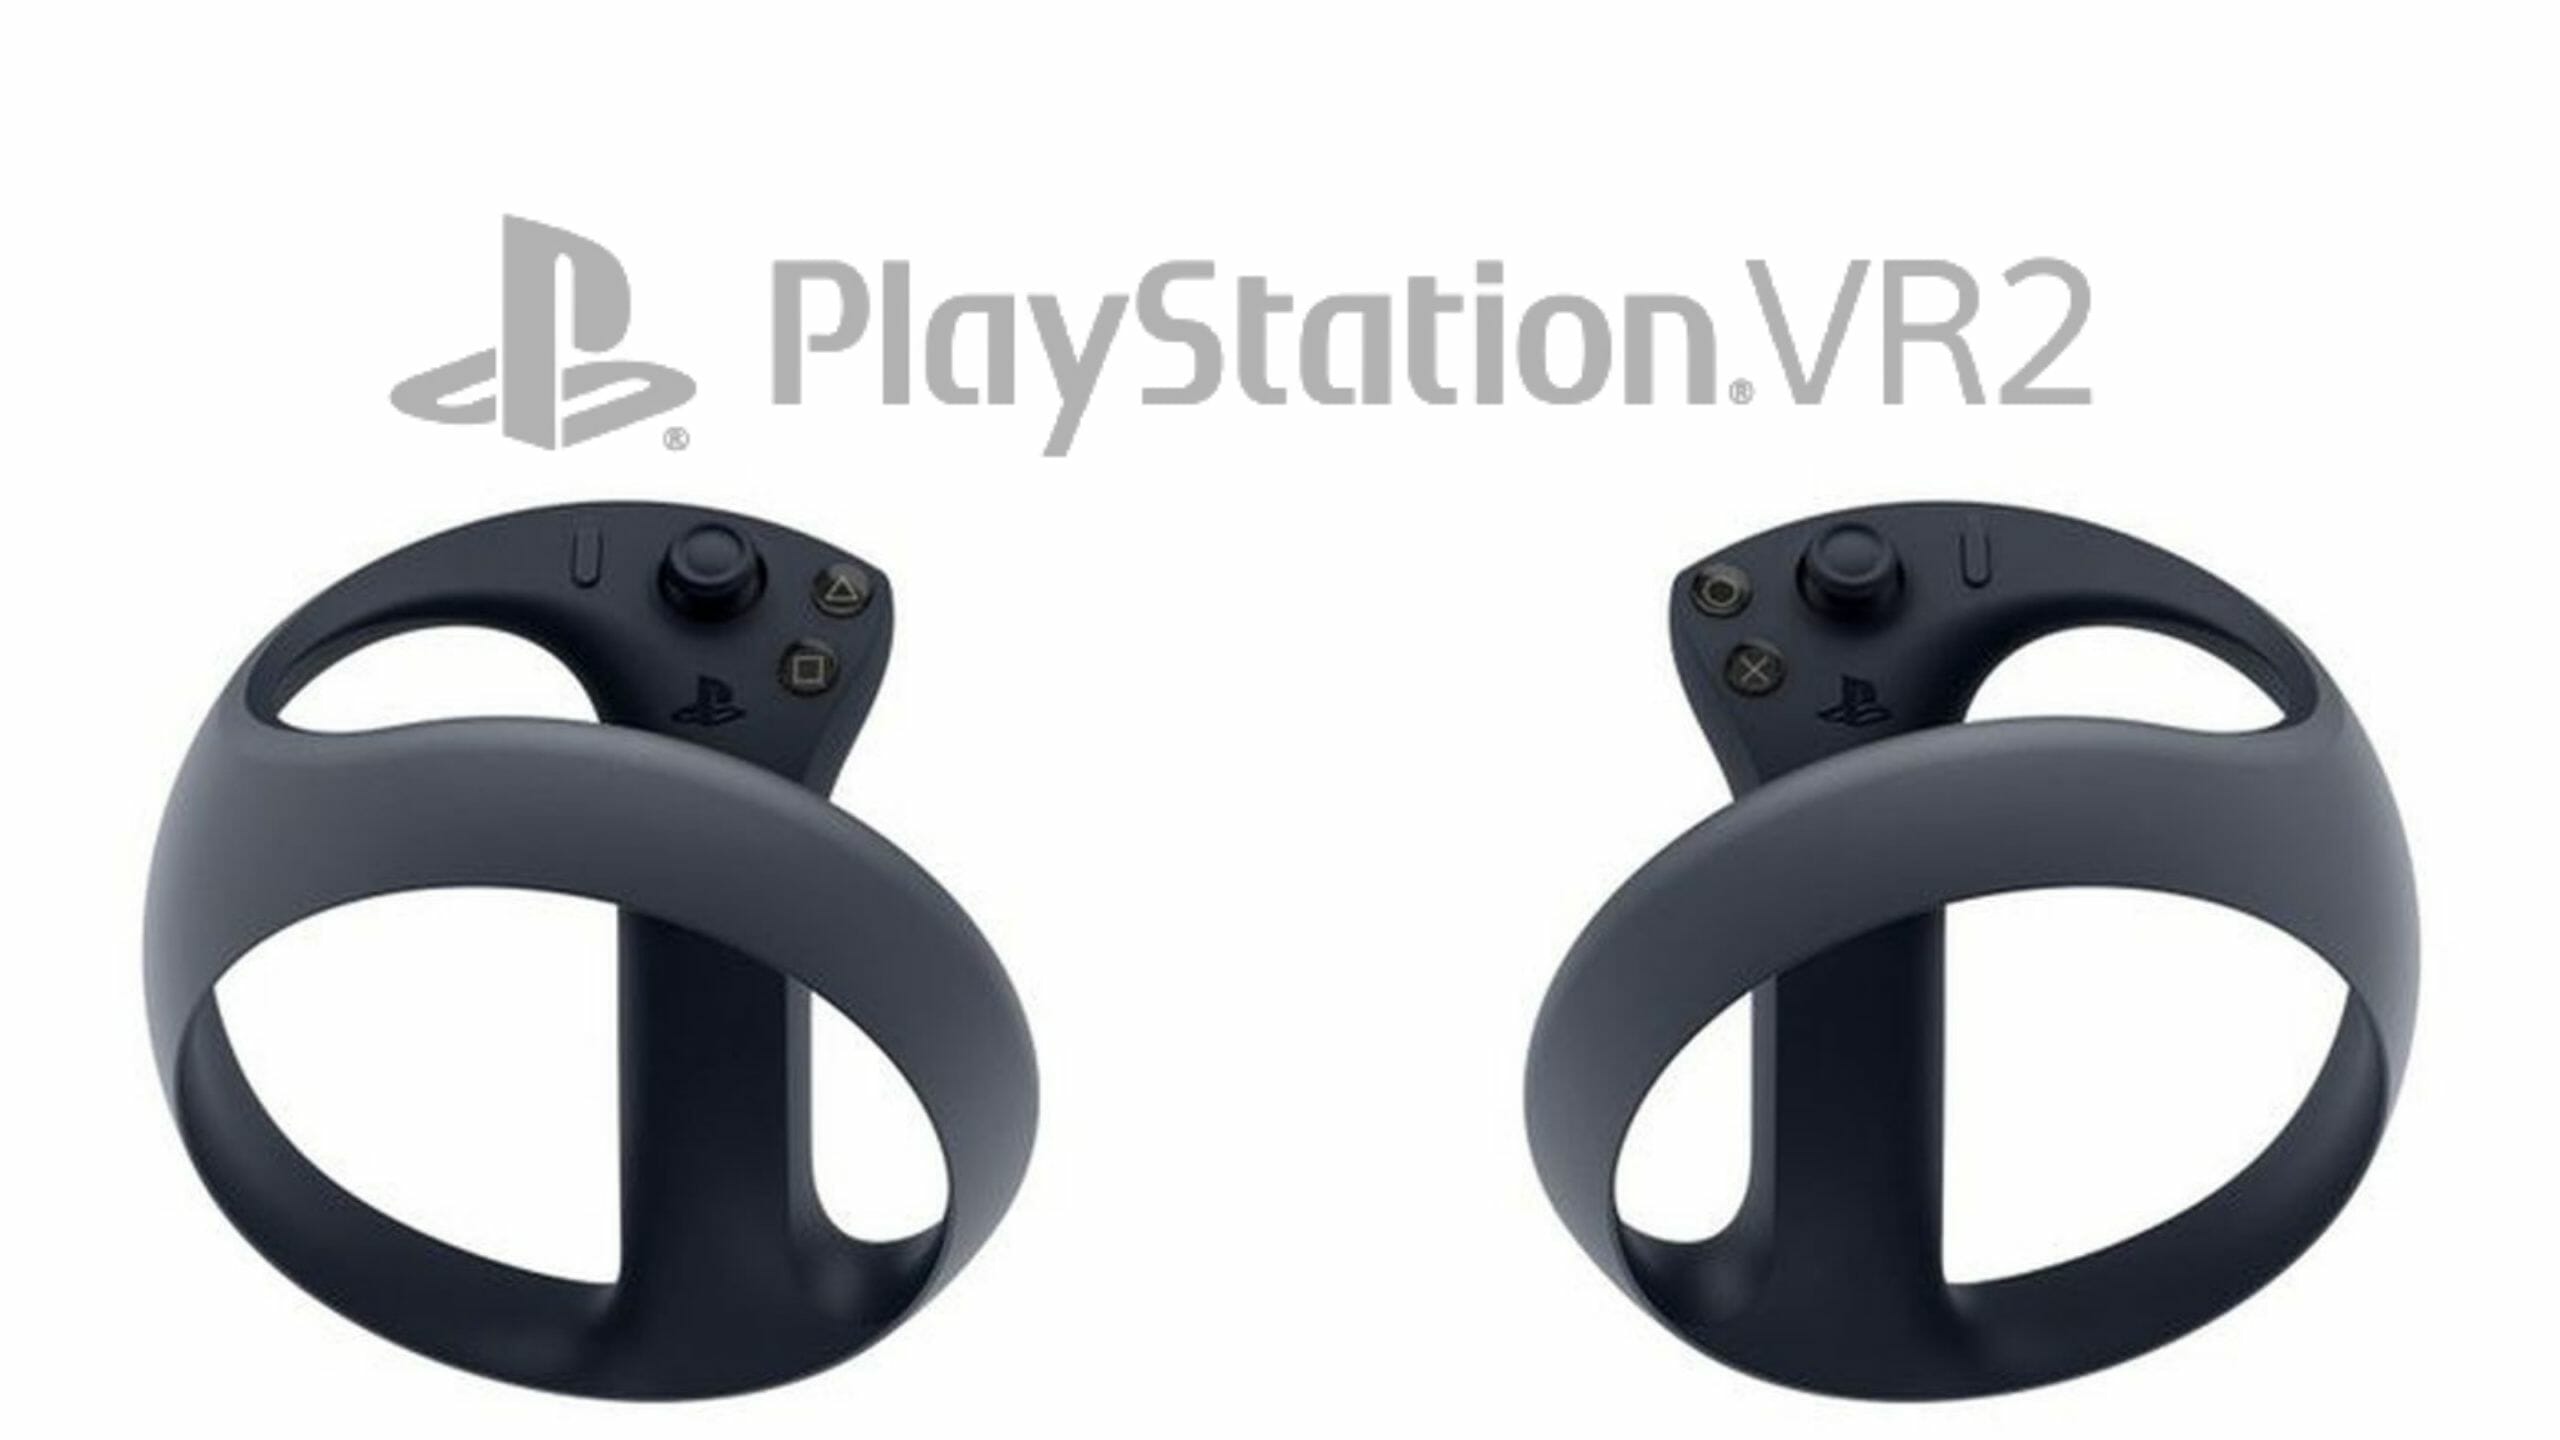 PlayStation VR2 and PlayStation VR2 Sense controller: the next